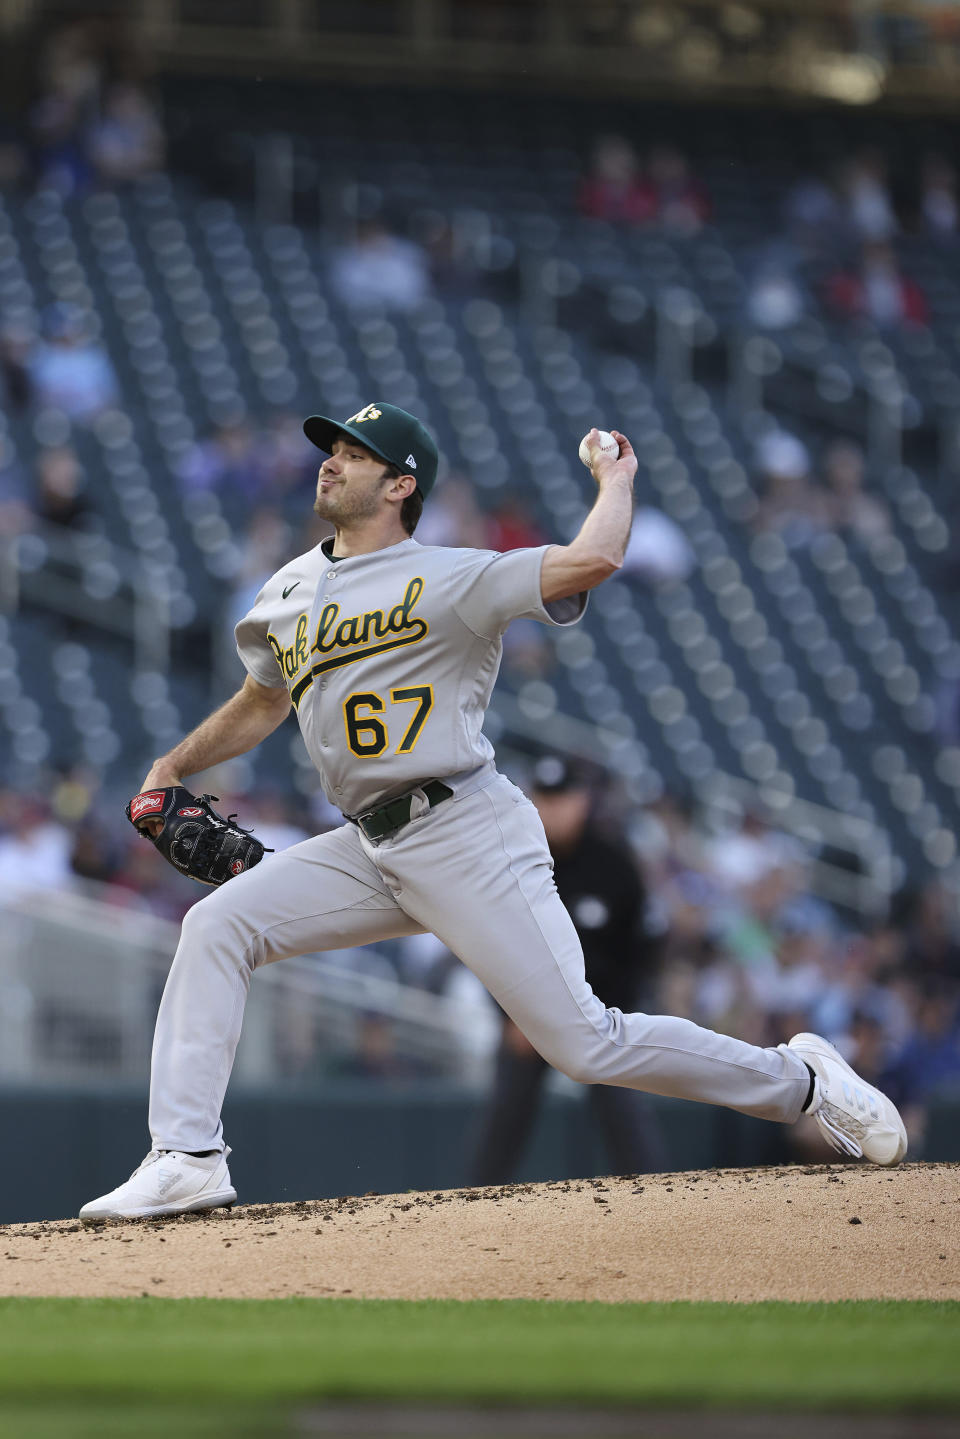 Oakland Athletics pitcher Zach Logue throws to a Minnesota Twins batter during the first inning of a baseball game Friday, May 6, 2022, in Minneapolis. (AP Photo/Stacy Bengs)